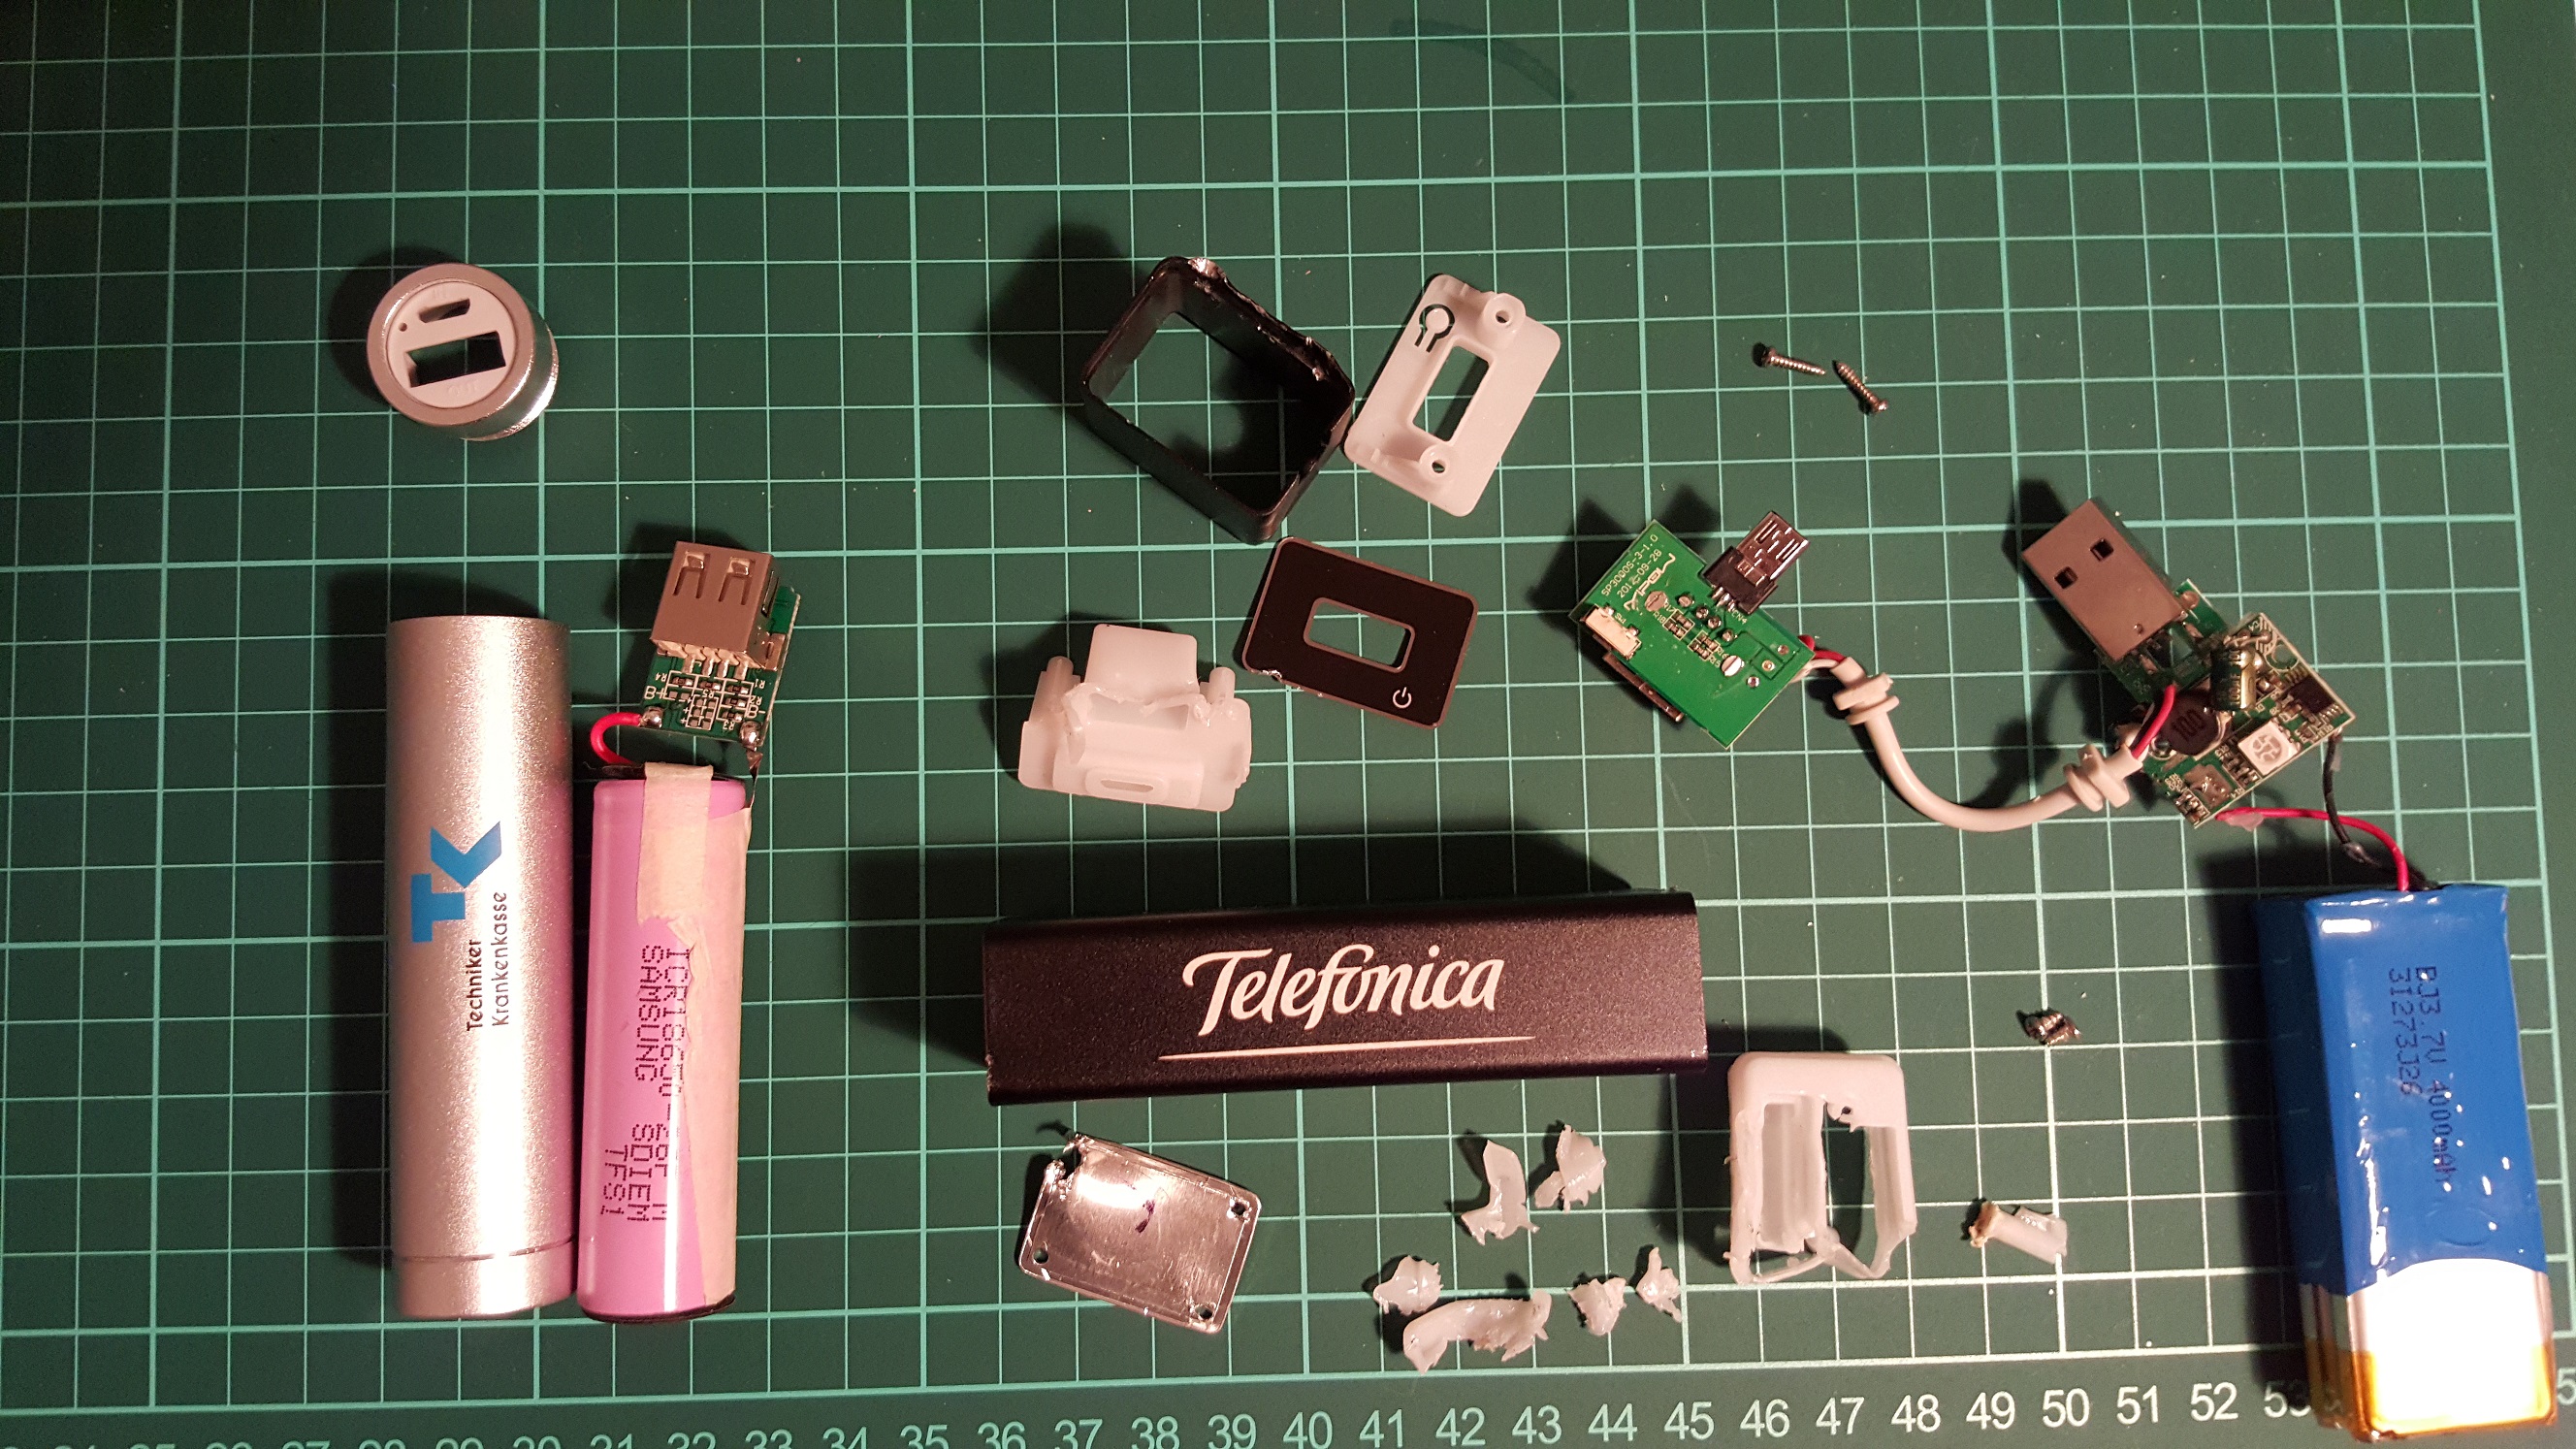 usb battery power supplies slaughtered